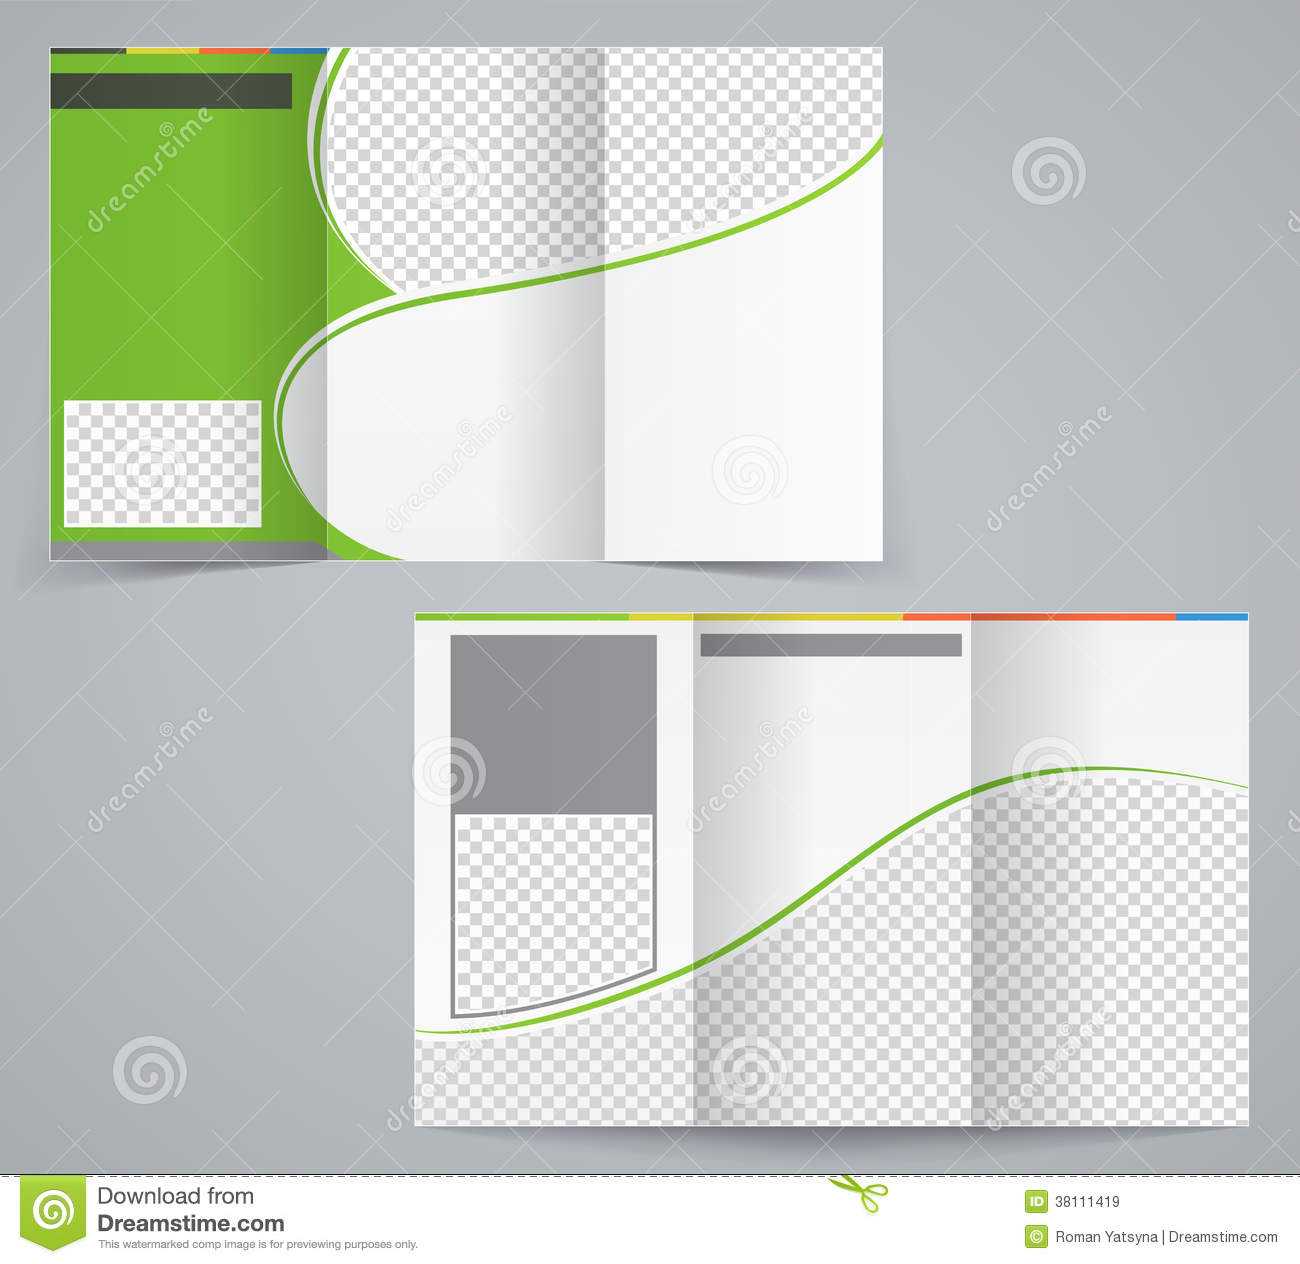 Tri Fold Business Brochure Template, Vector Green Stock Within Free Illustrator Brochure Templates Download